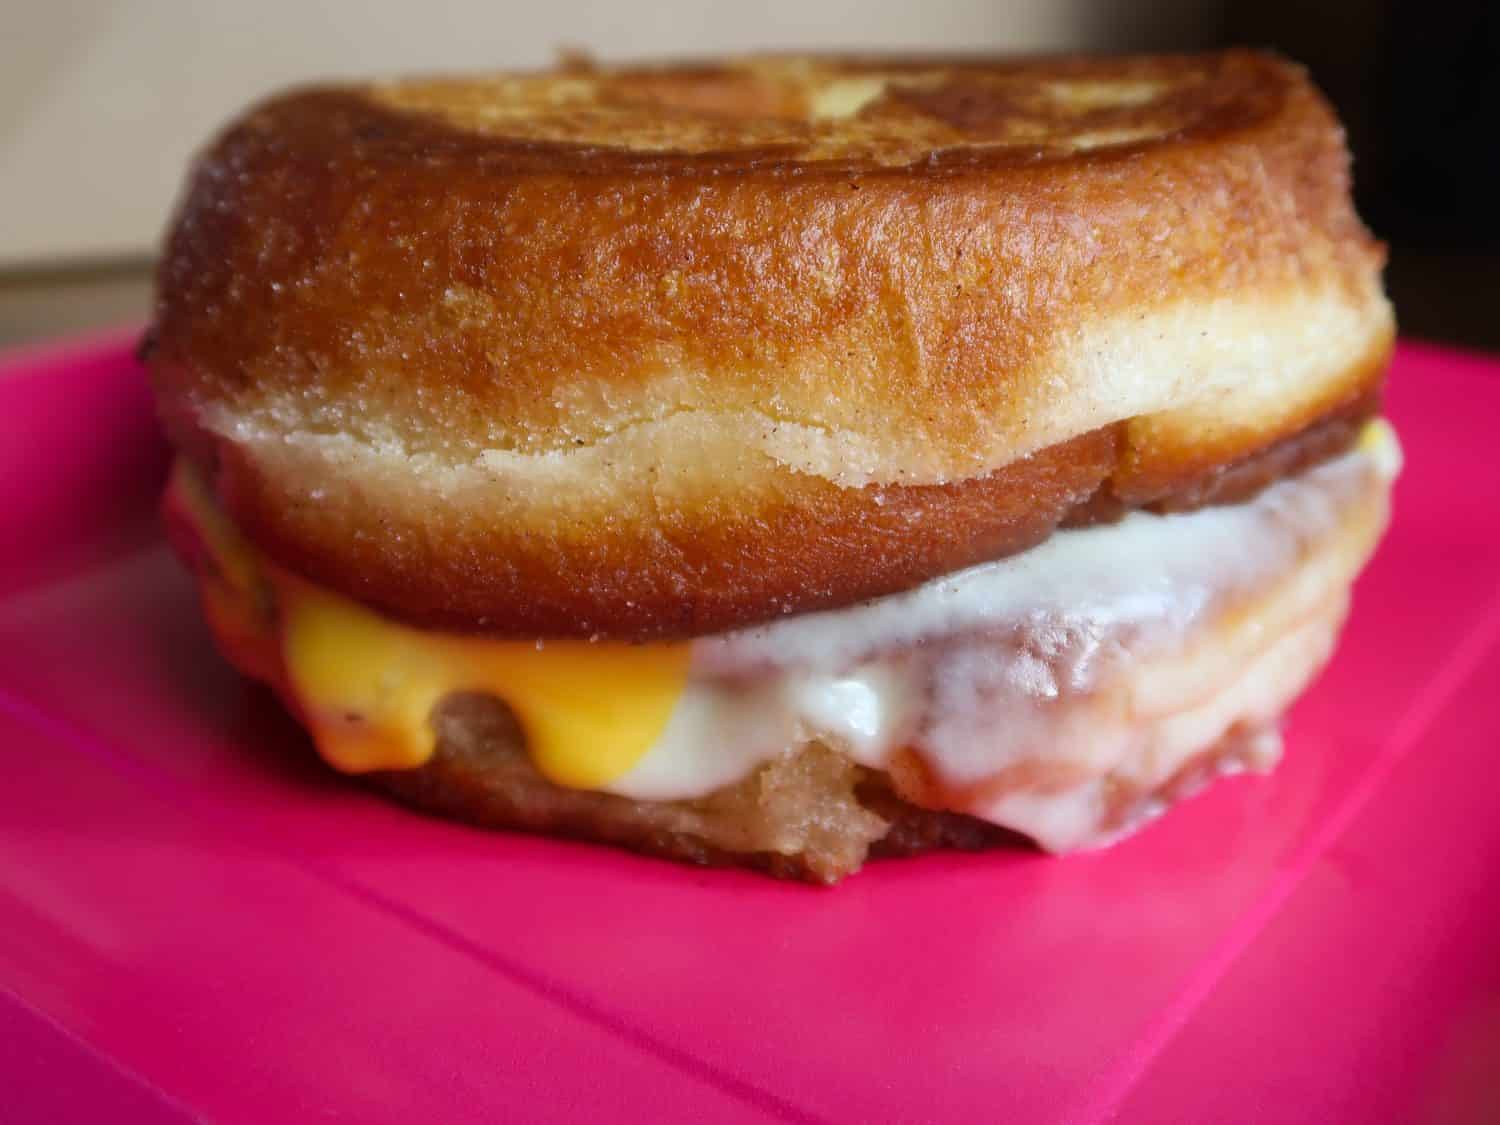 Grilled cheese donut sandwich.